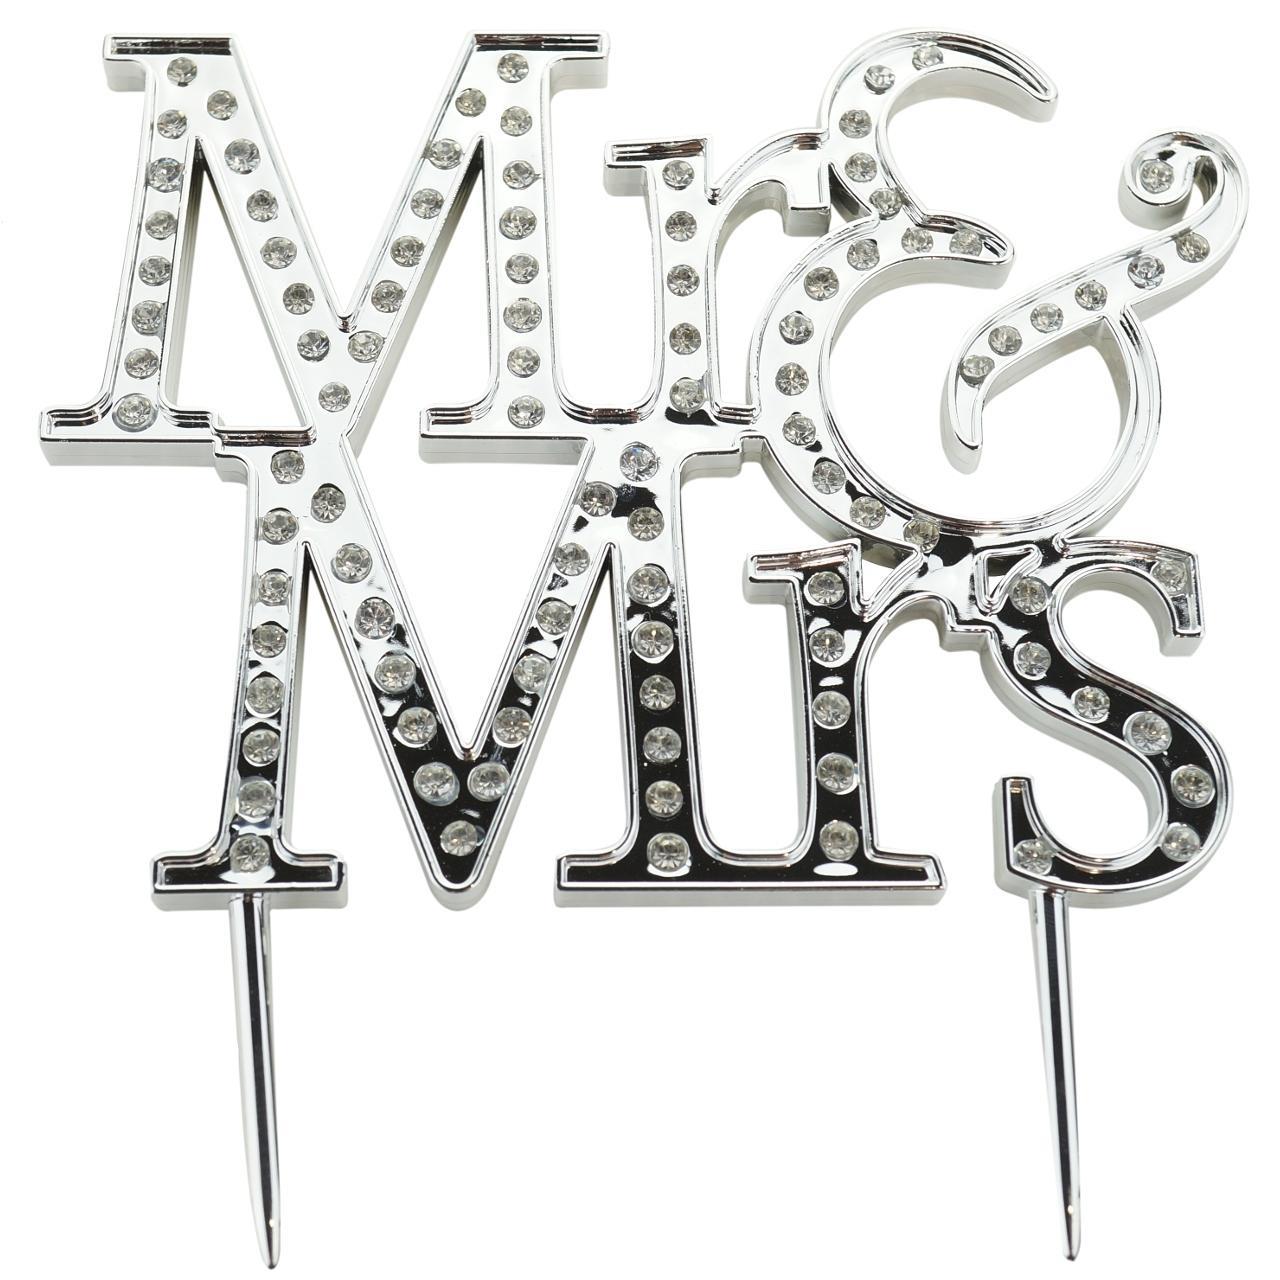 Wedding Cake Topper Mr and Mrs Decorations Supplies